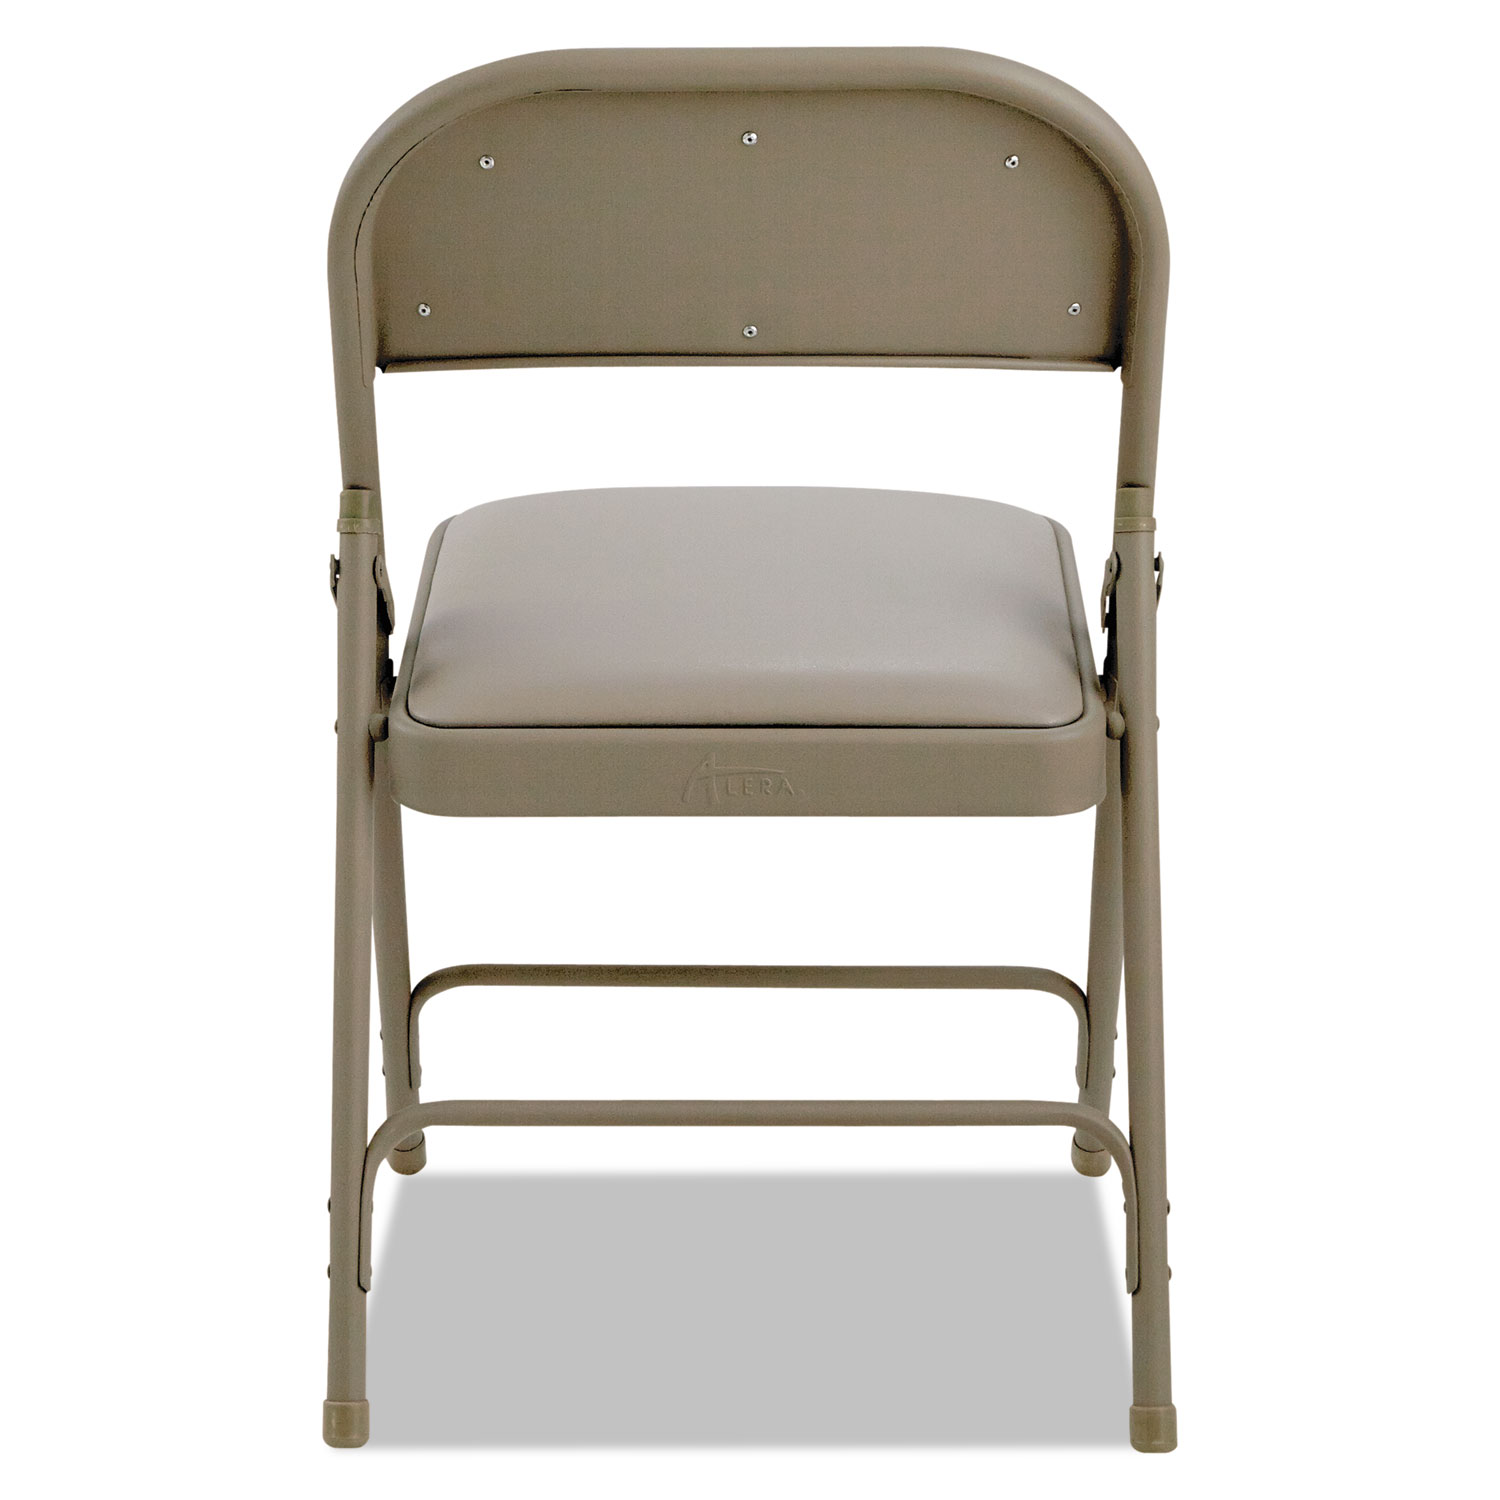 Steel Folding Chair with Two-Brace Support, Padded Back/Seat, Tan, 4/Carton